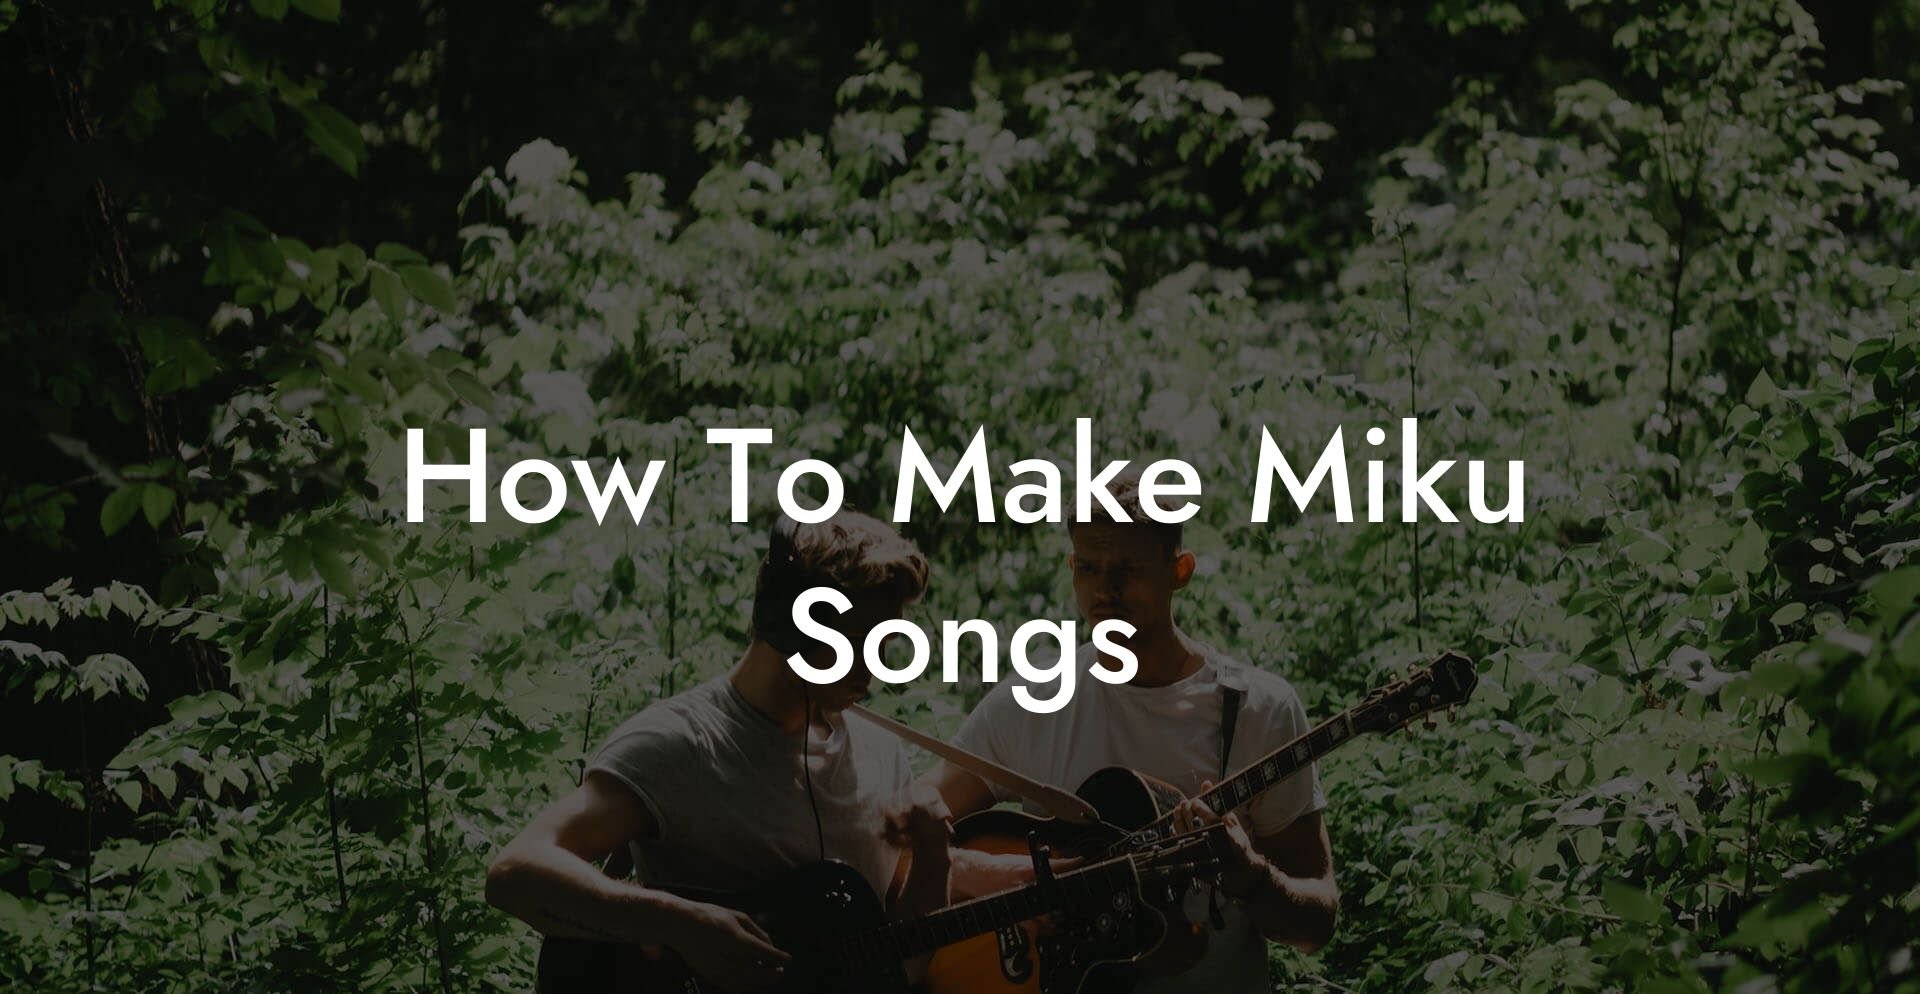 how to make miku songs lyric assistant